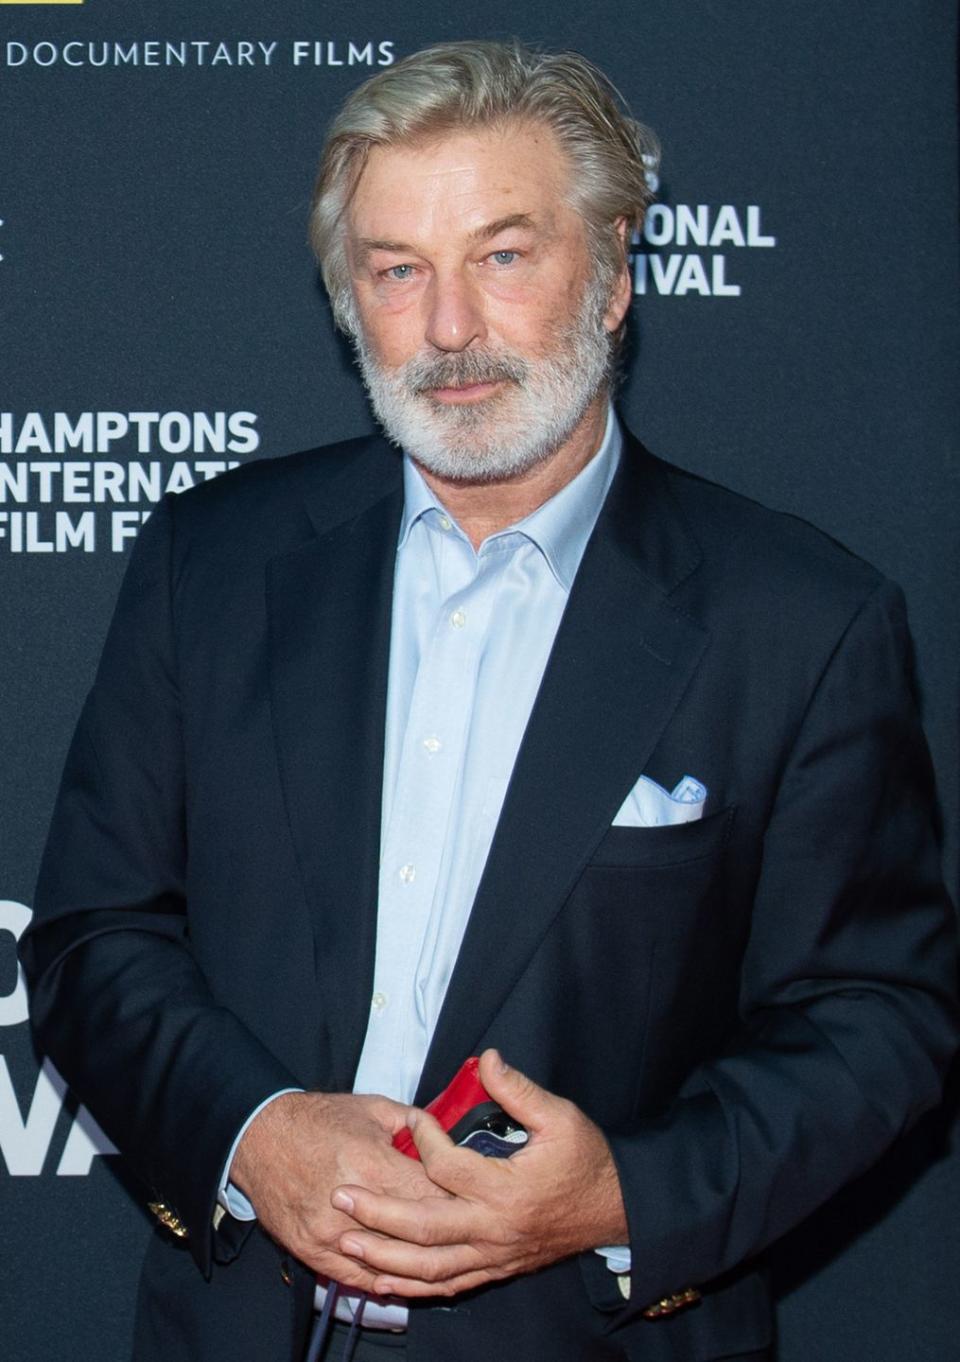 alec baldwin attends the world premiere of national geographic documentary films' 'the first wave' at hamptons international film festival on october 07, 2021 in east hampton, new york